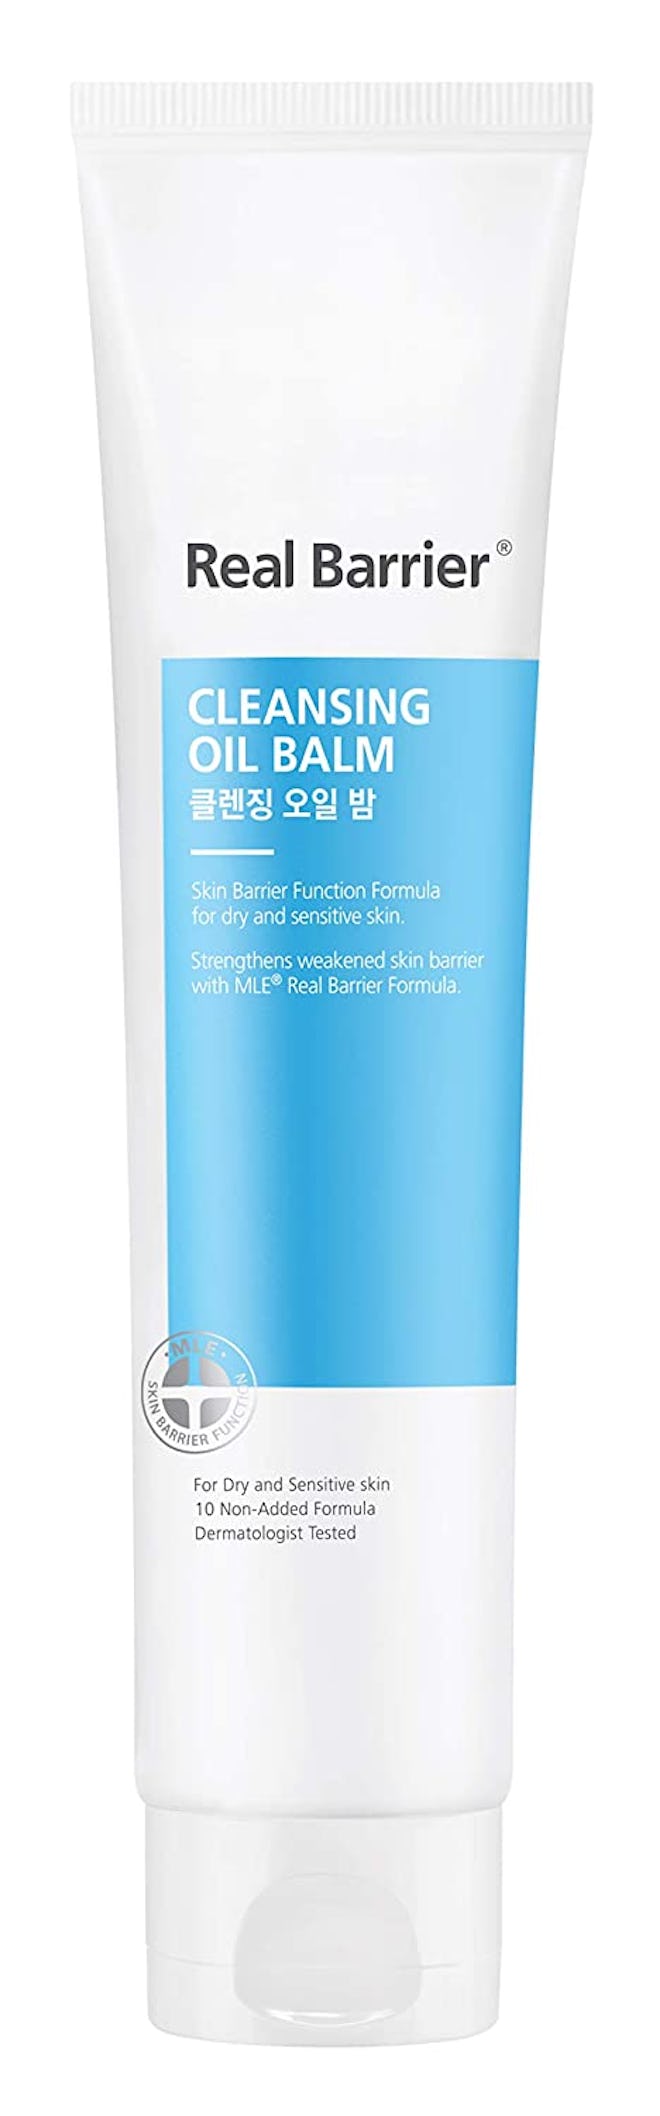 Atopalm Real Barrier Cleansing Oil Balm